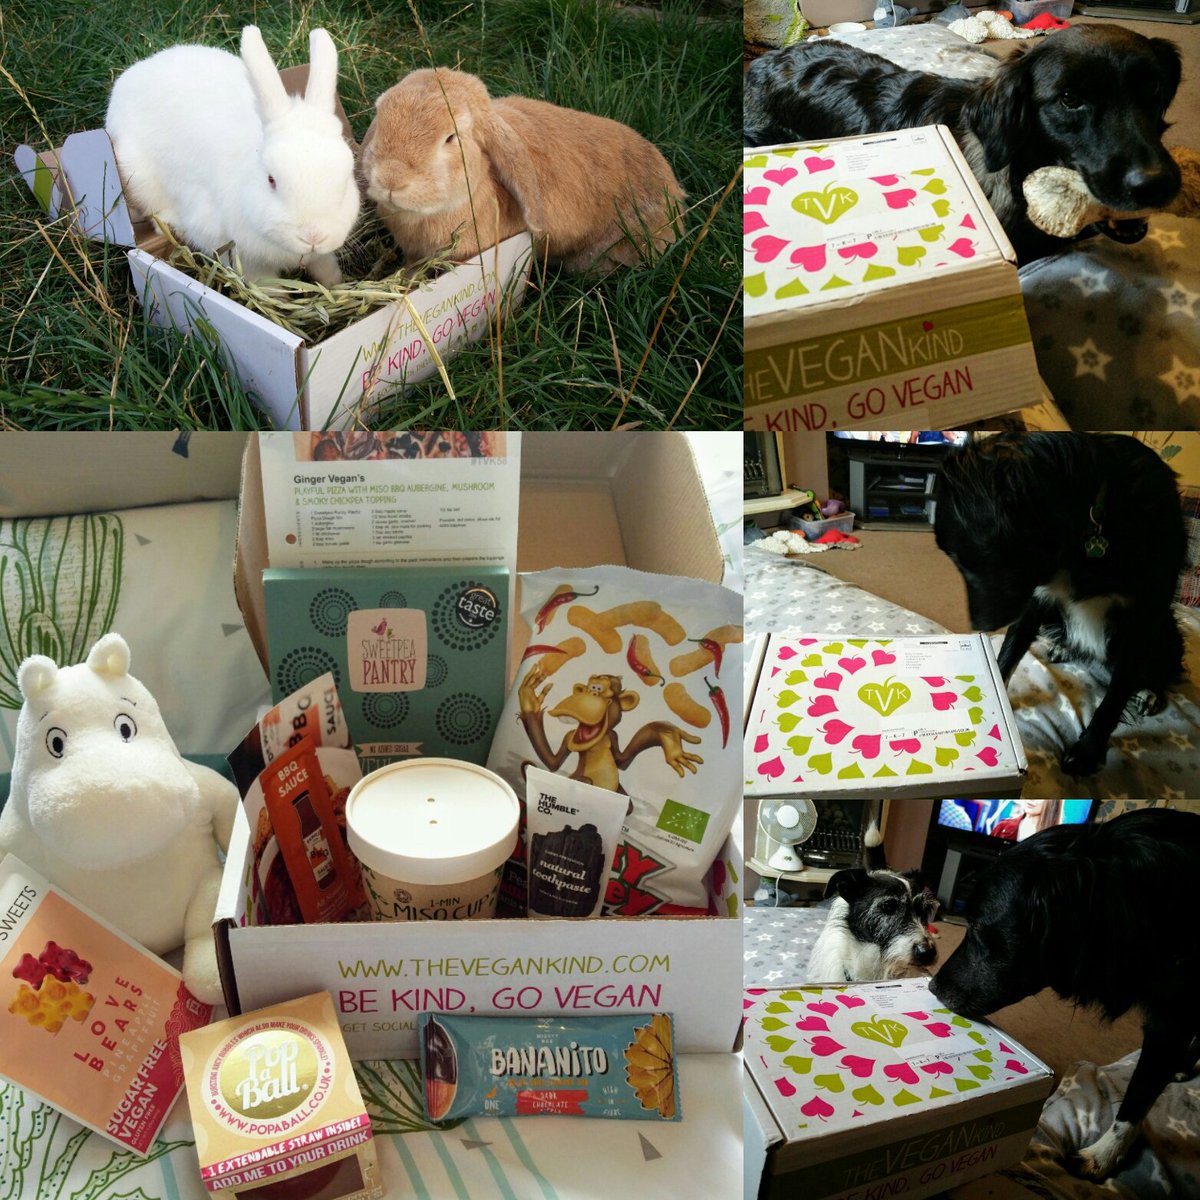 Everyone's favourite monthly delivery! Paws off the sweets Moomin!! @thevegankind #TVKLifestylebox @cheekymonkeypb @freefromitaly @SweetpeaPantry @mightybeelondon @Popaball @TidefordOrganic @thejealouslife @HumbleBrush @doctor_wills